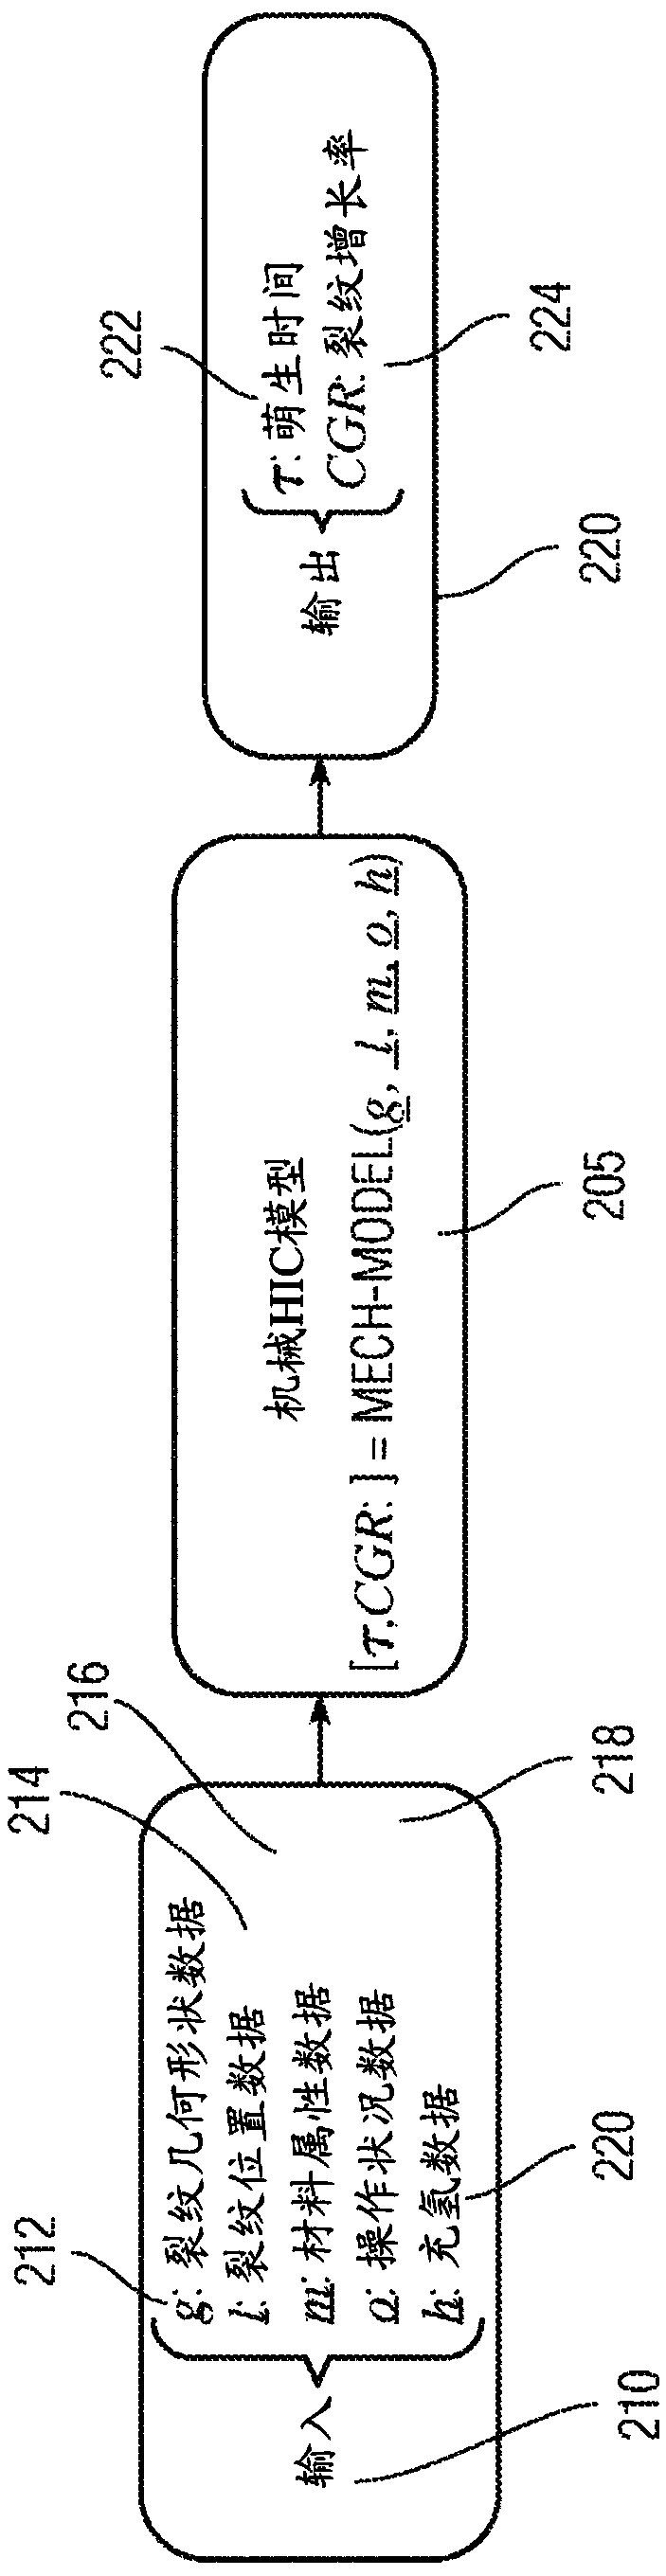 Systems and methods for rapid prediction of hydrogen-induced cracking (HIC) in pipelines, pressure vessels, and piping systems and for taking action in relation thereto